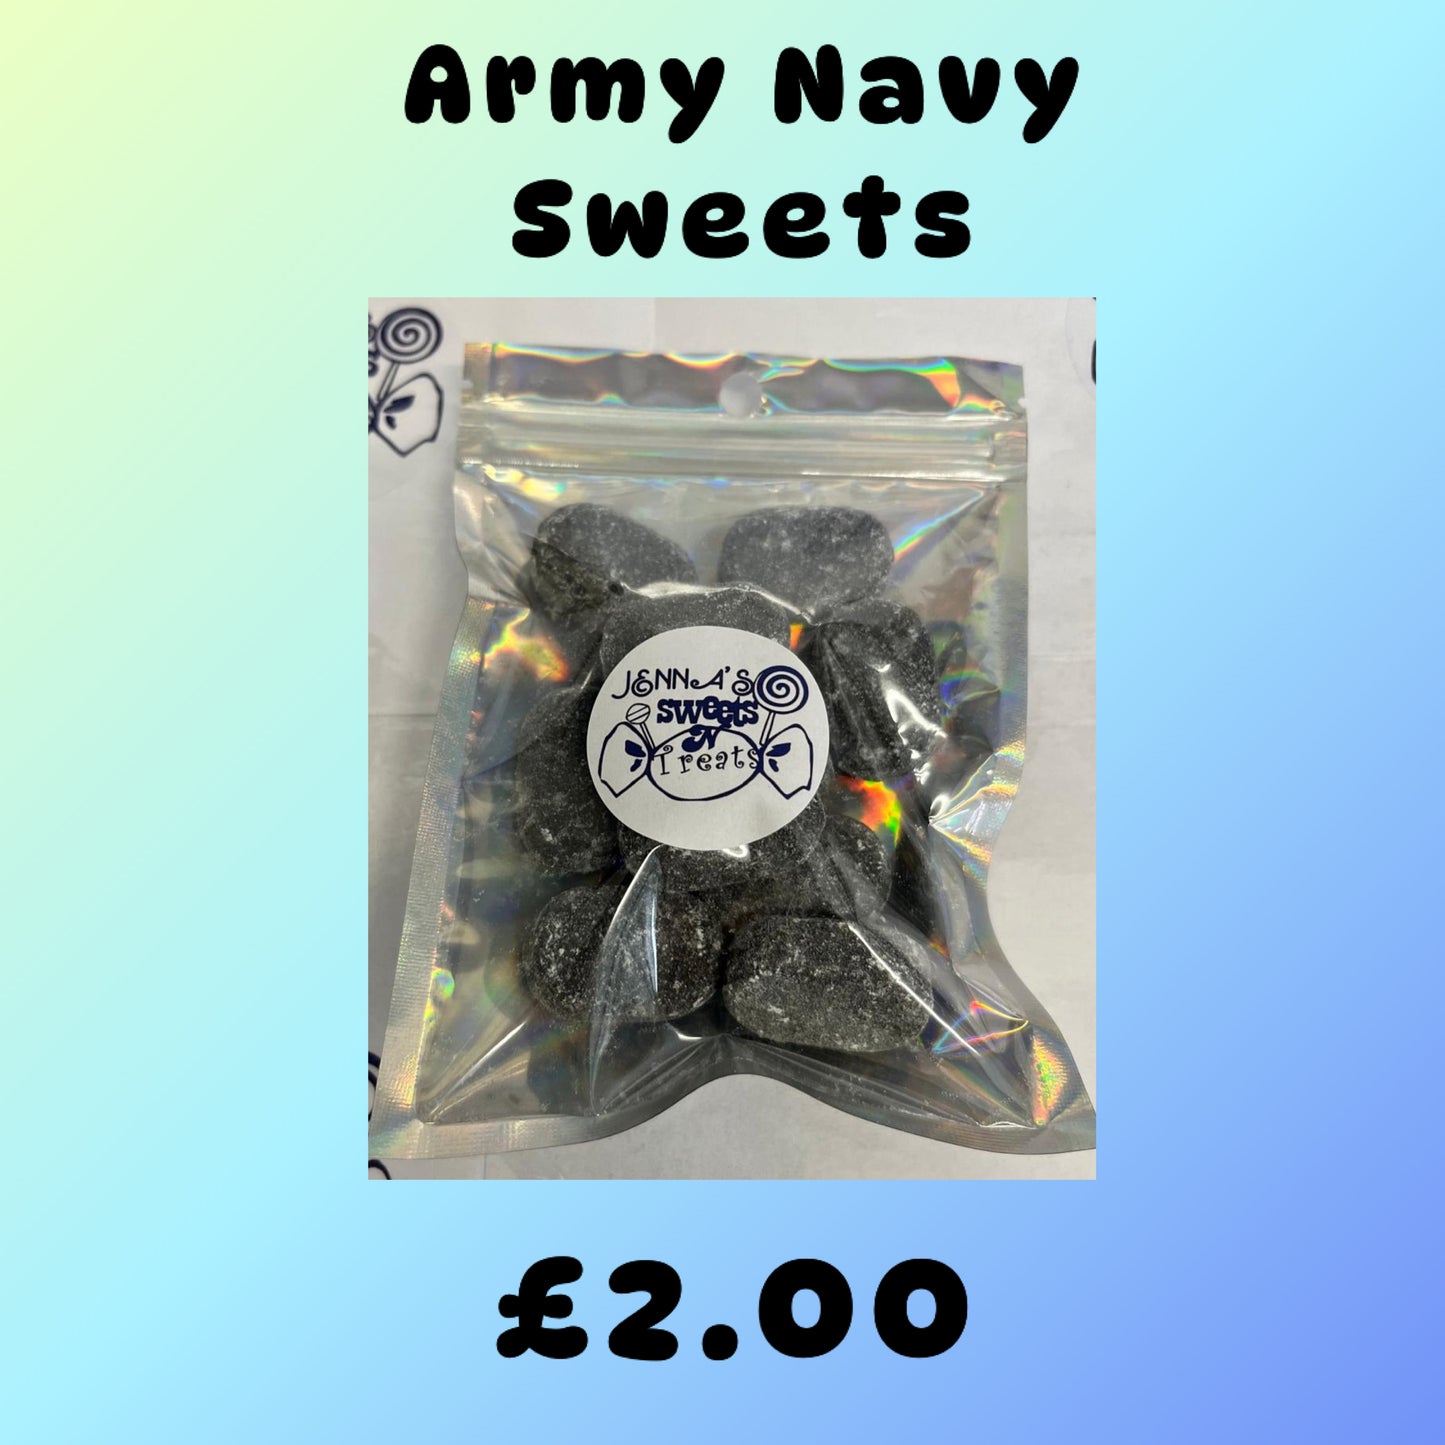 Army navy sweets